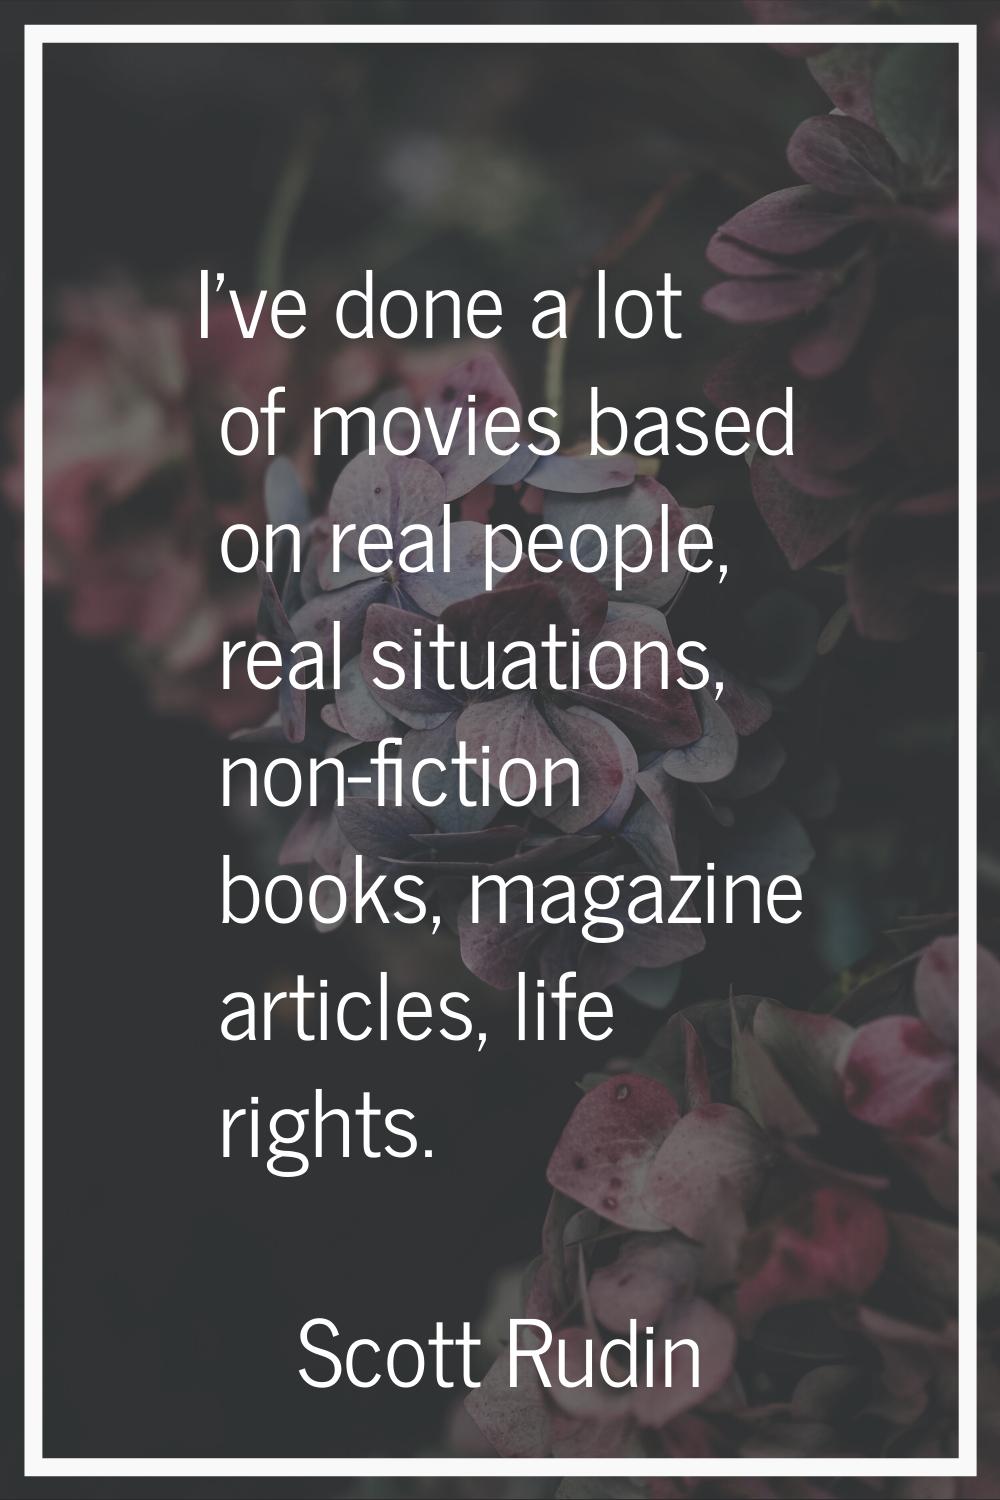 I've done a lot of movies based on real people, real situations, non-fiction books, magazine articl